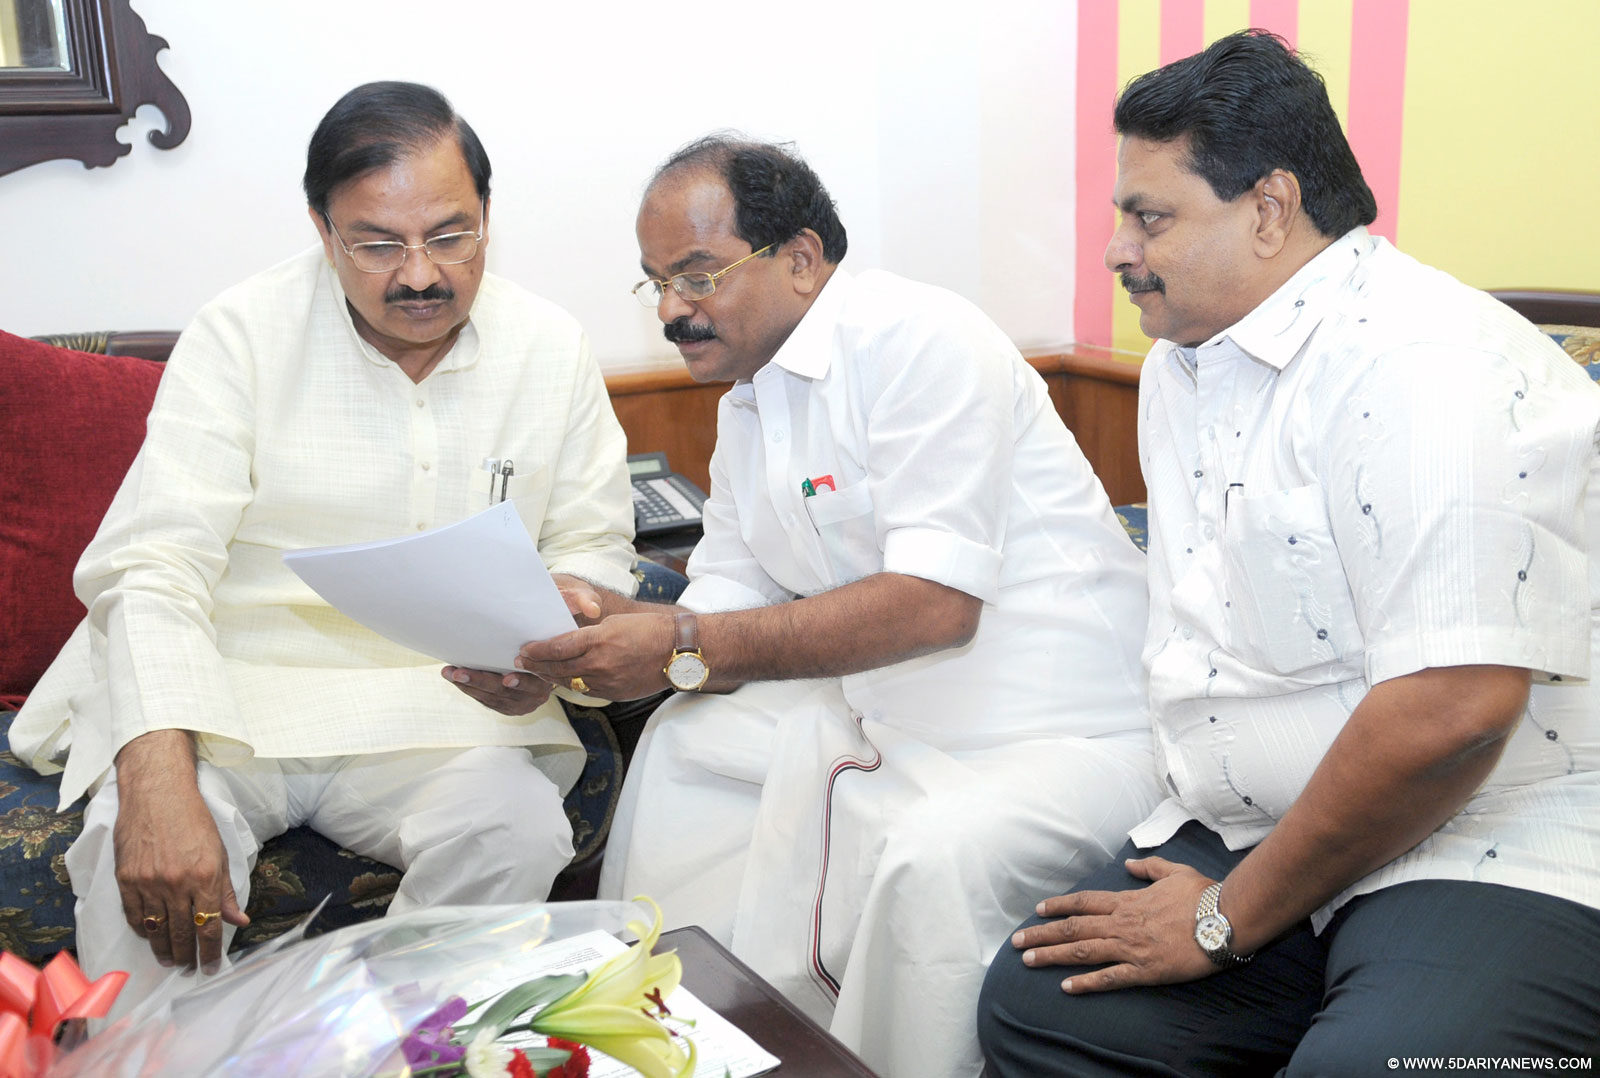 The Special Representatives of Government of Telengana, Shri Ramachandru Tejavath and Dr. S. Venugopala Chary meeting the Minister of State for Culture (Independent Charge), Tourism (Independent Charge) and Civil Aviation, Dr. Mahesh Sharma, in New Delhi on September 30, 2015.